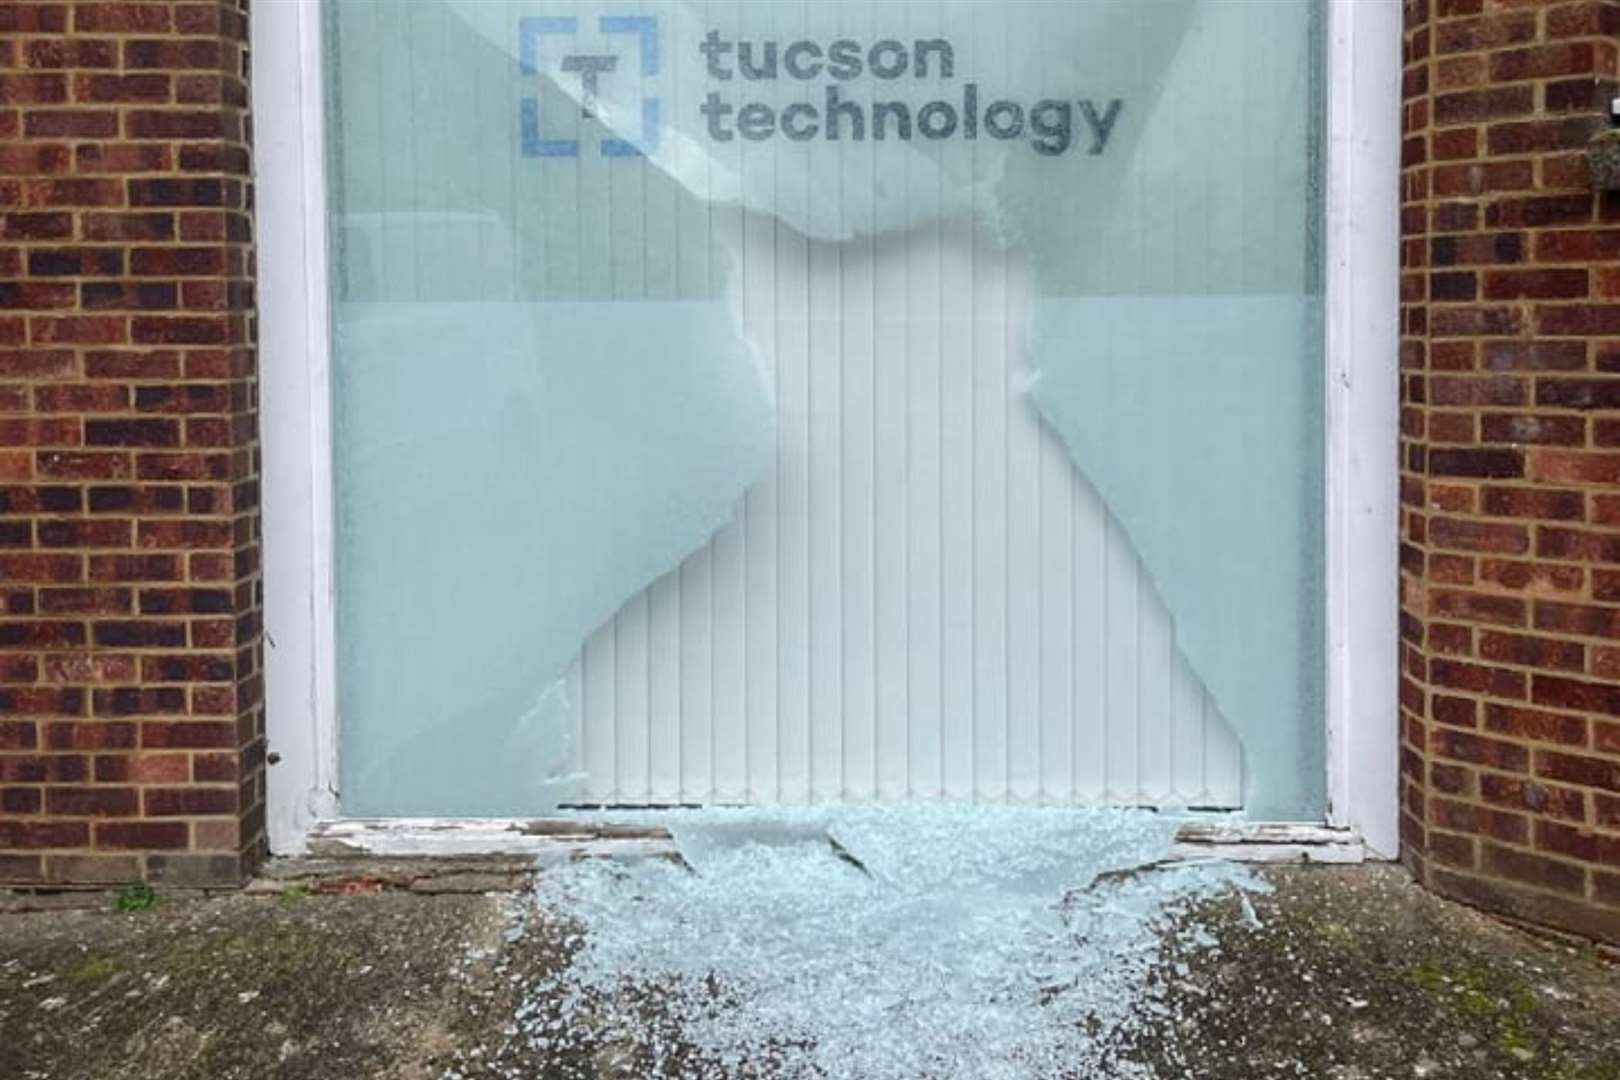 Tucson Technology in Wye was vandalised this week. Pictures: Tucson Technology